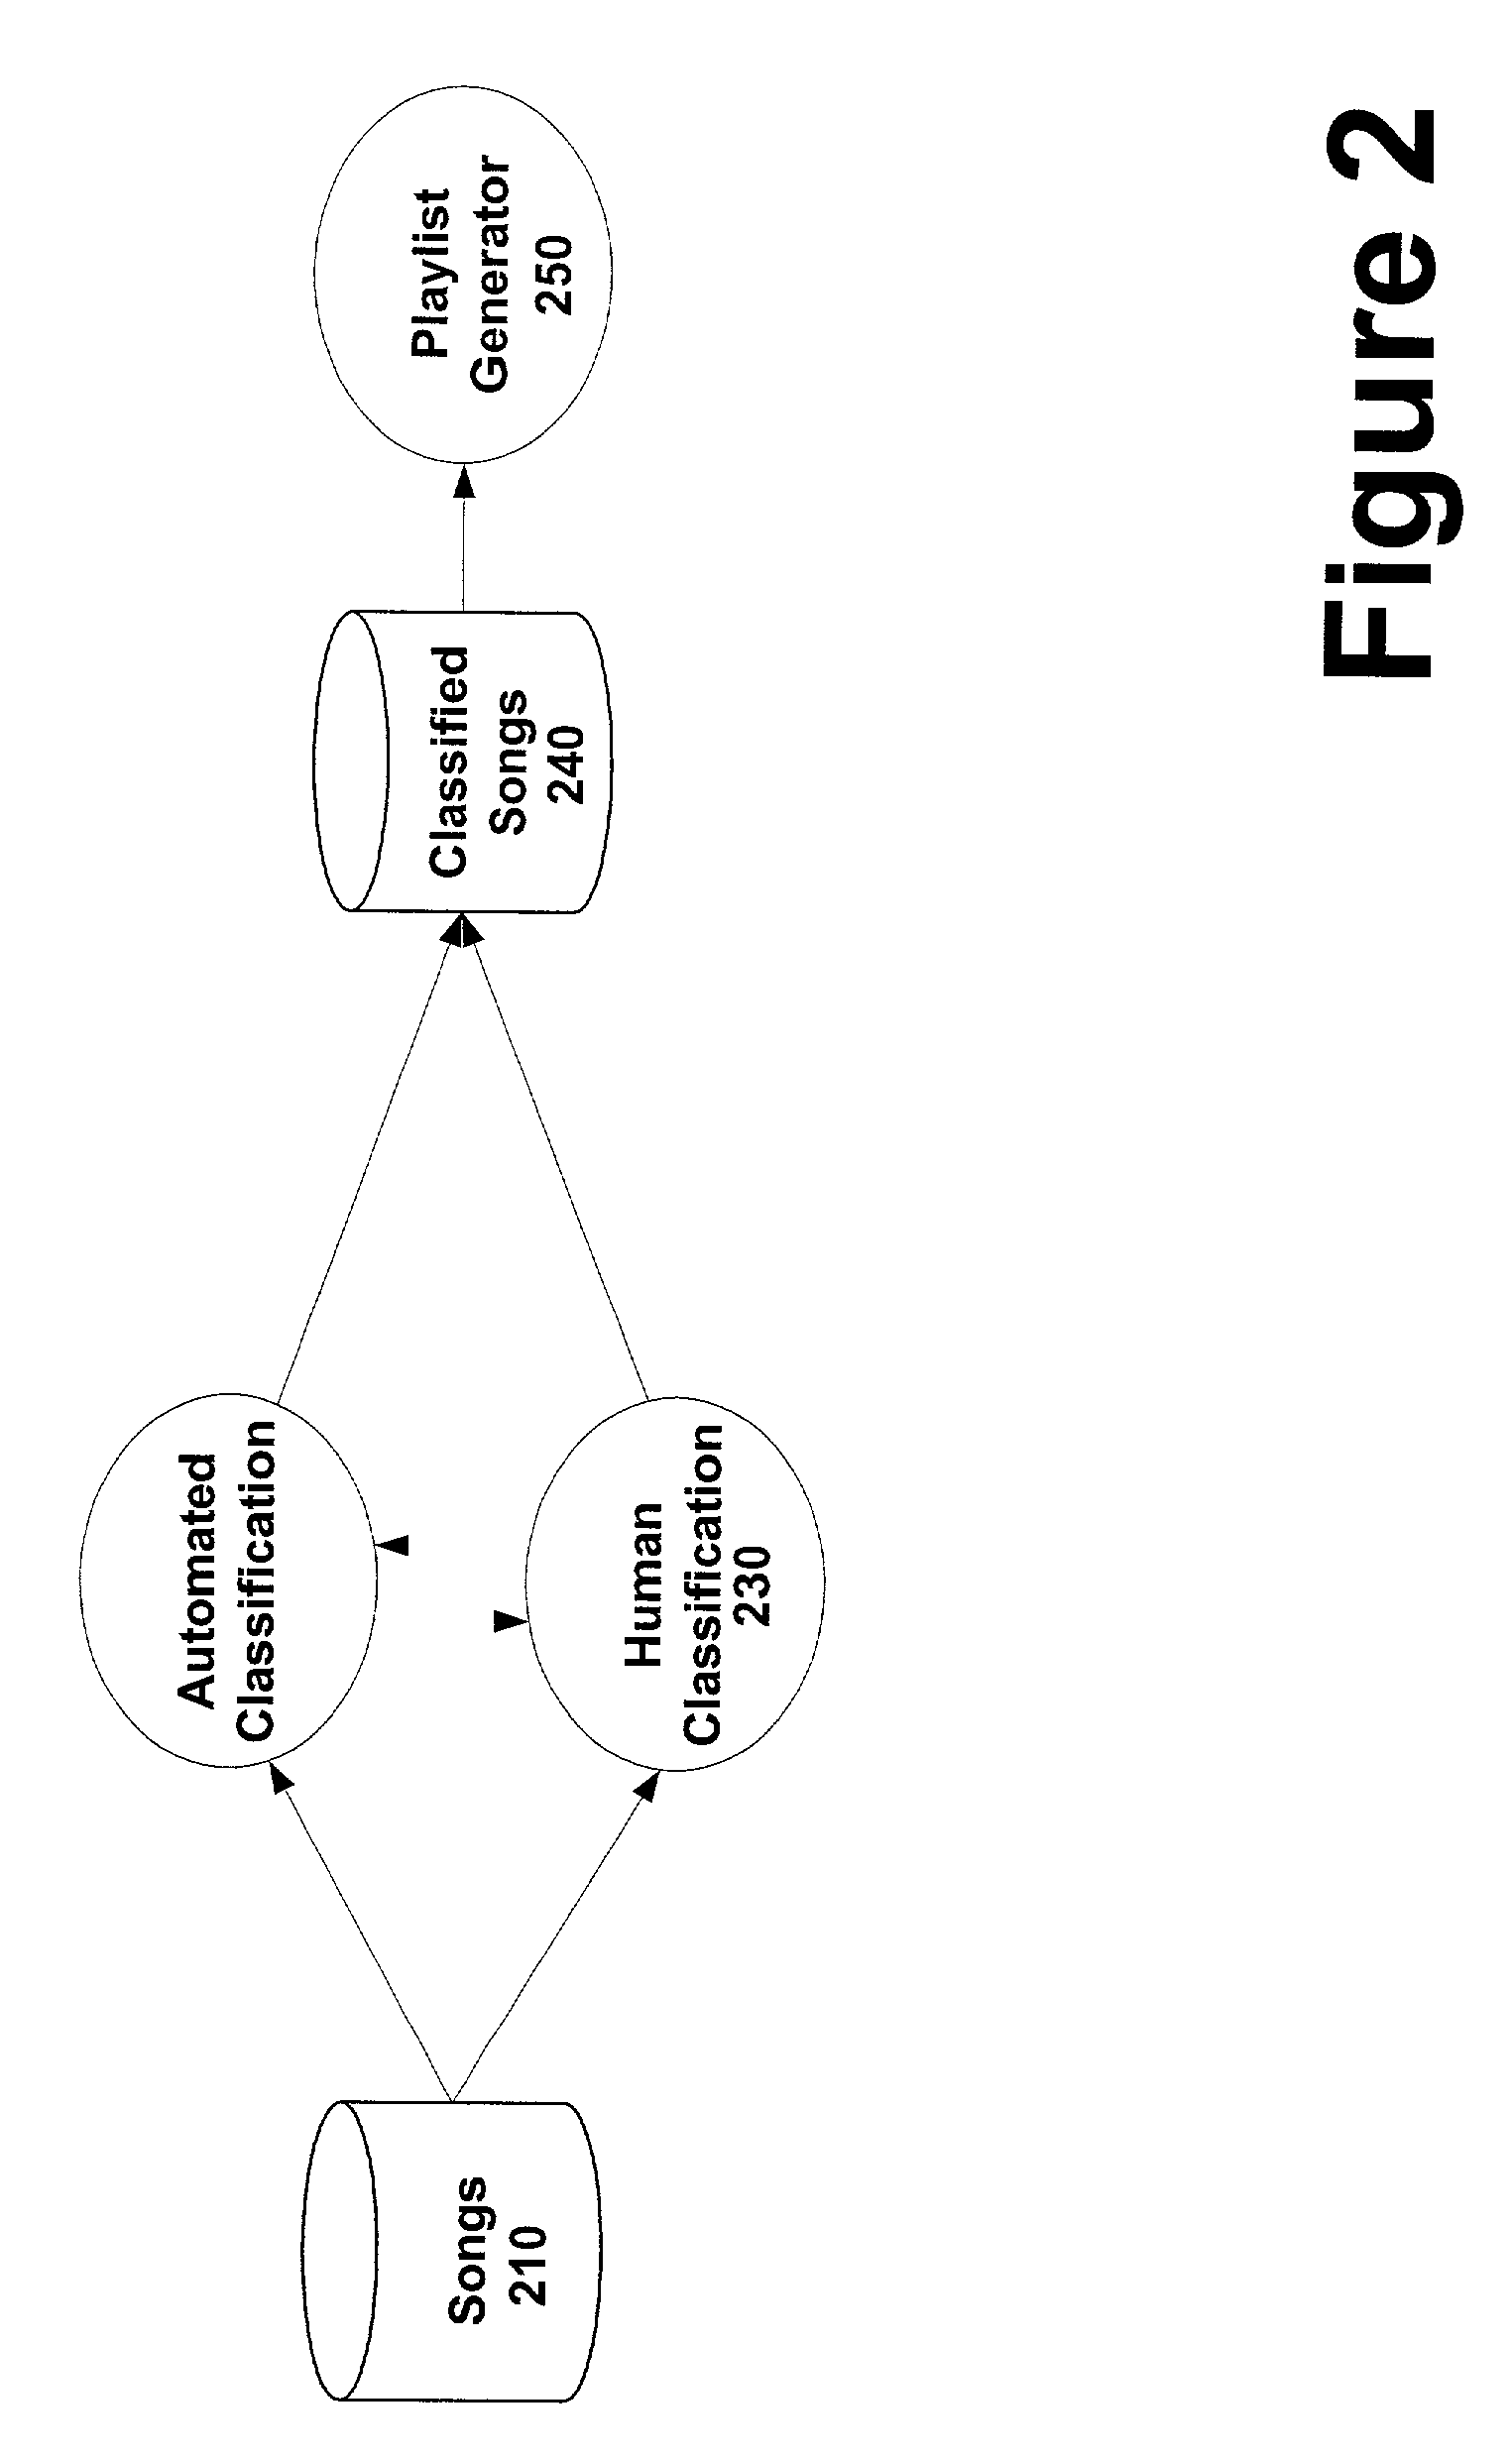 System and method for audio fingerprinting